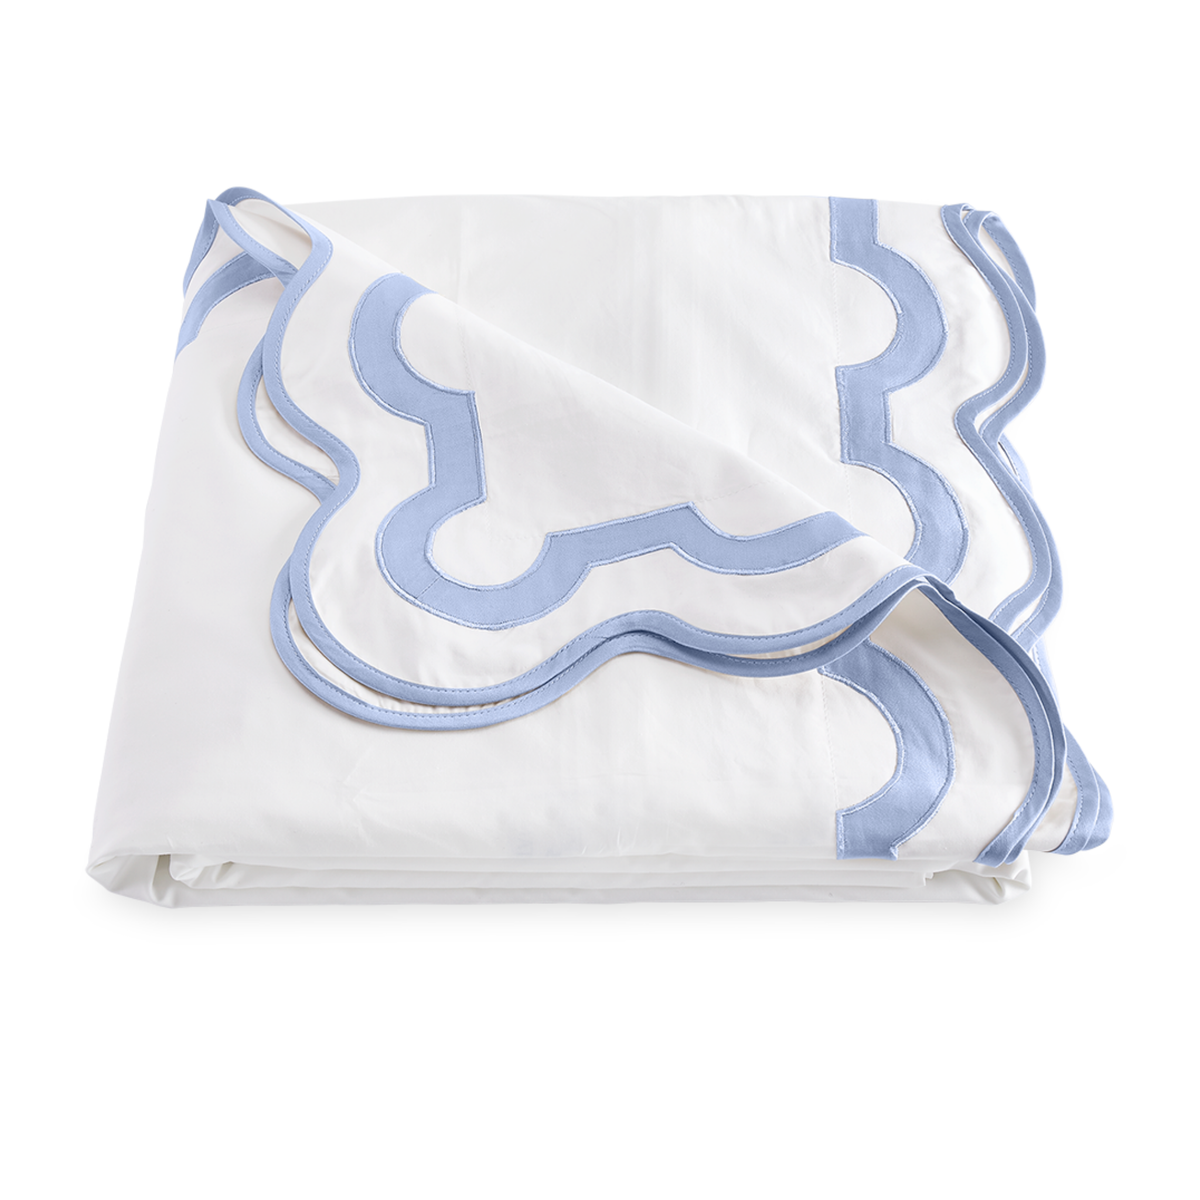 Folded Duvet Cover of Matouk Mirasol Collection in Azure Color